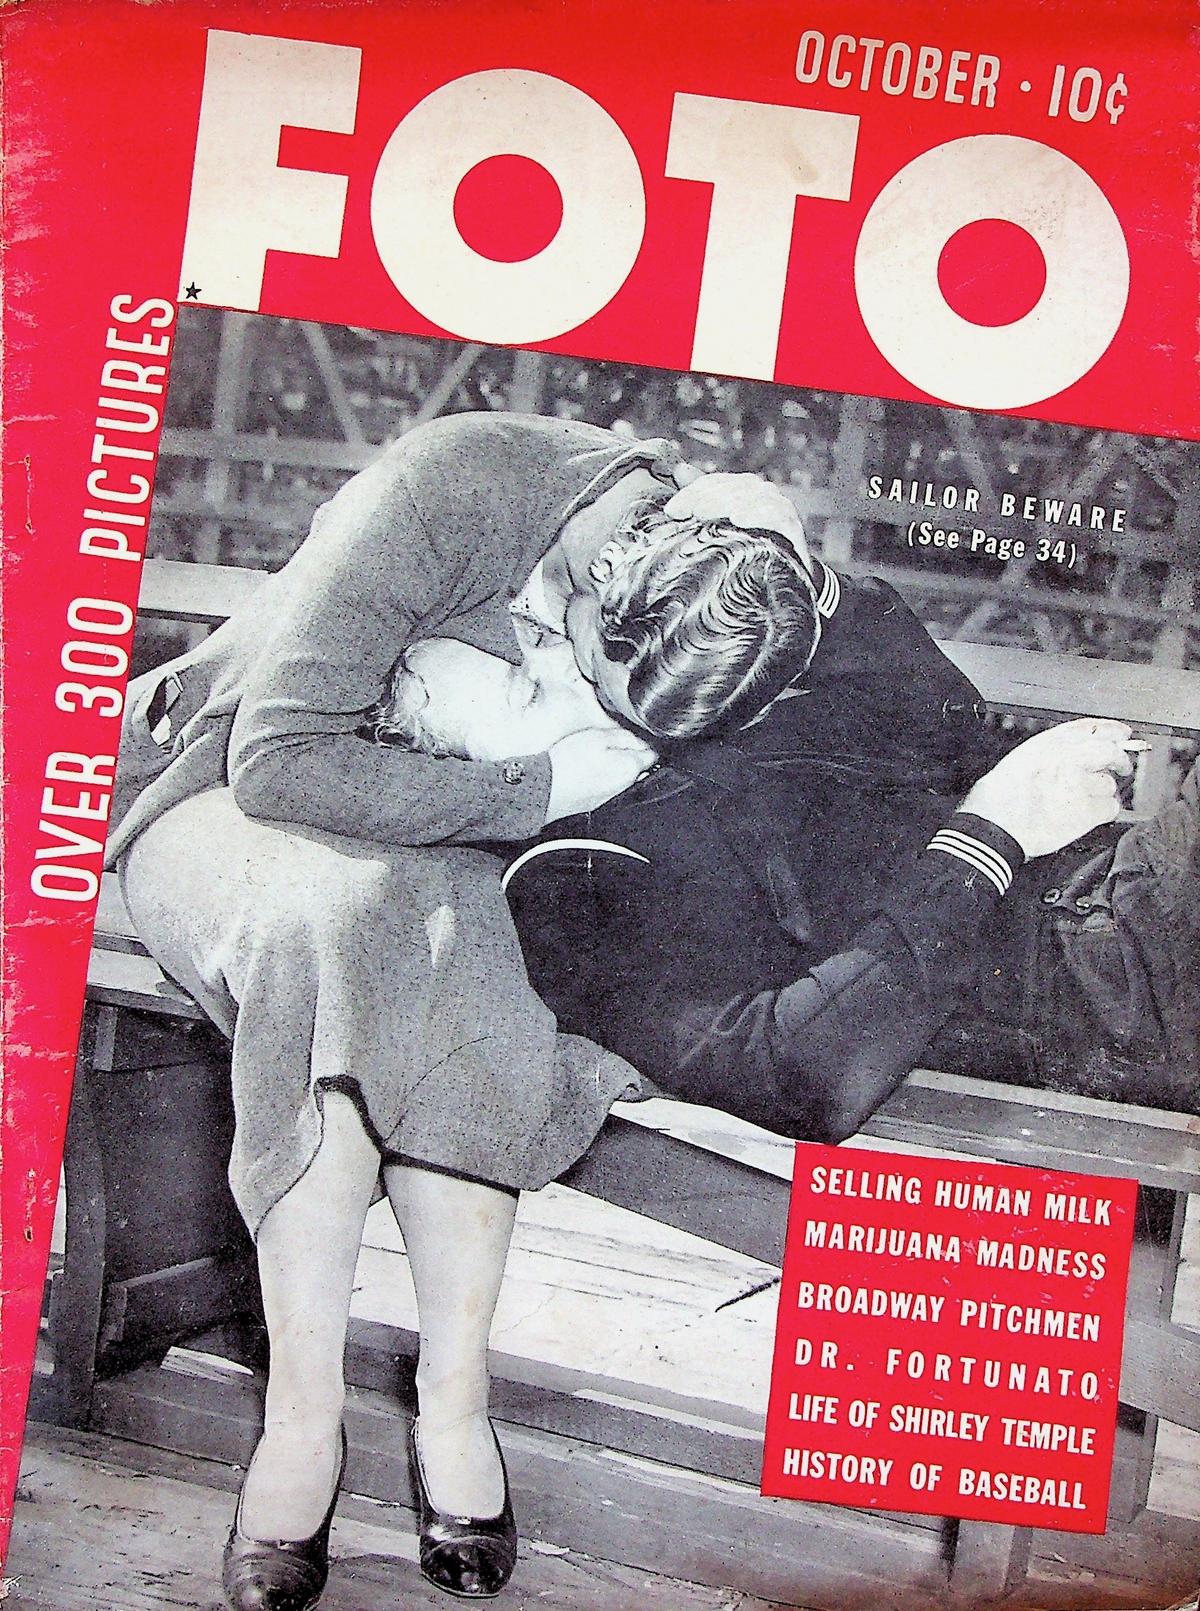 Foto Magazine by Dell October 1937 Golden Age Hollywood High Society Gossip and Photo Publication 10